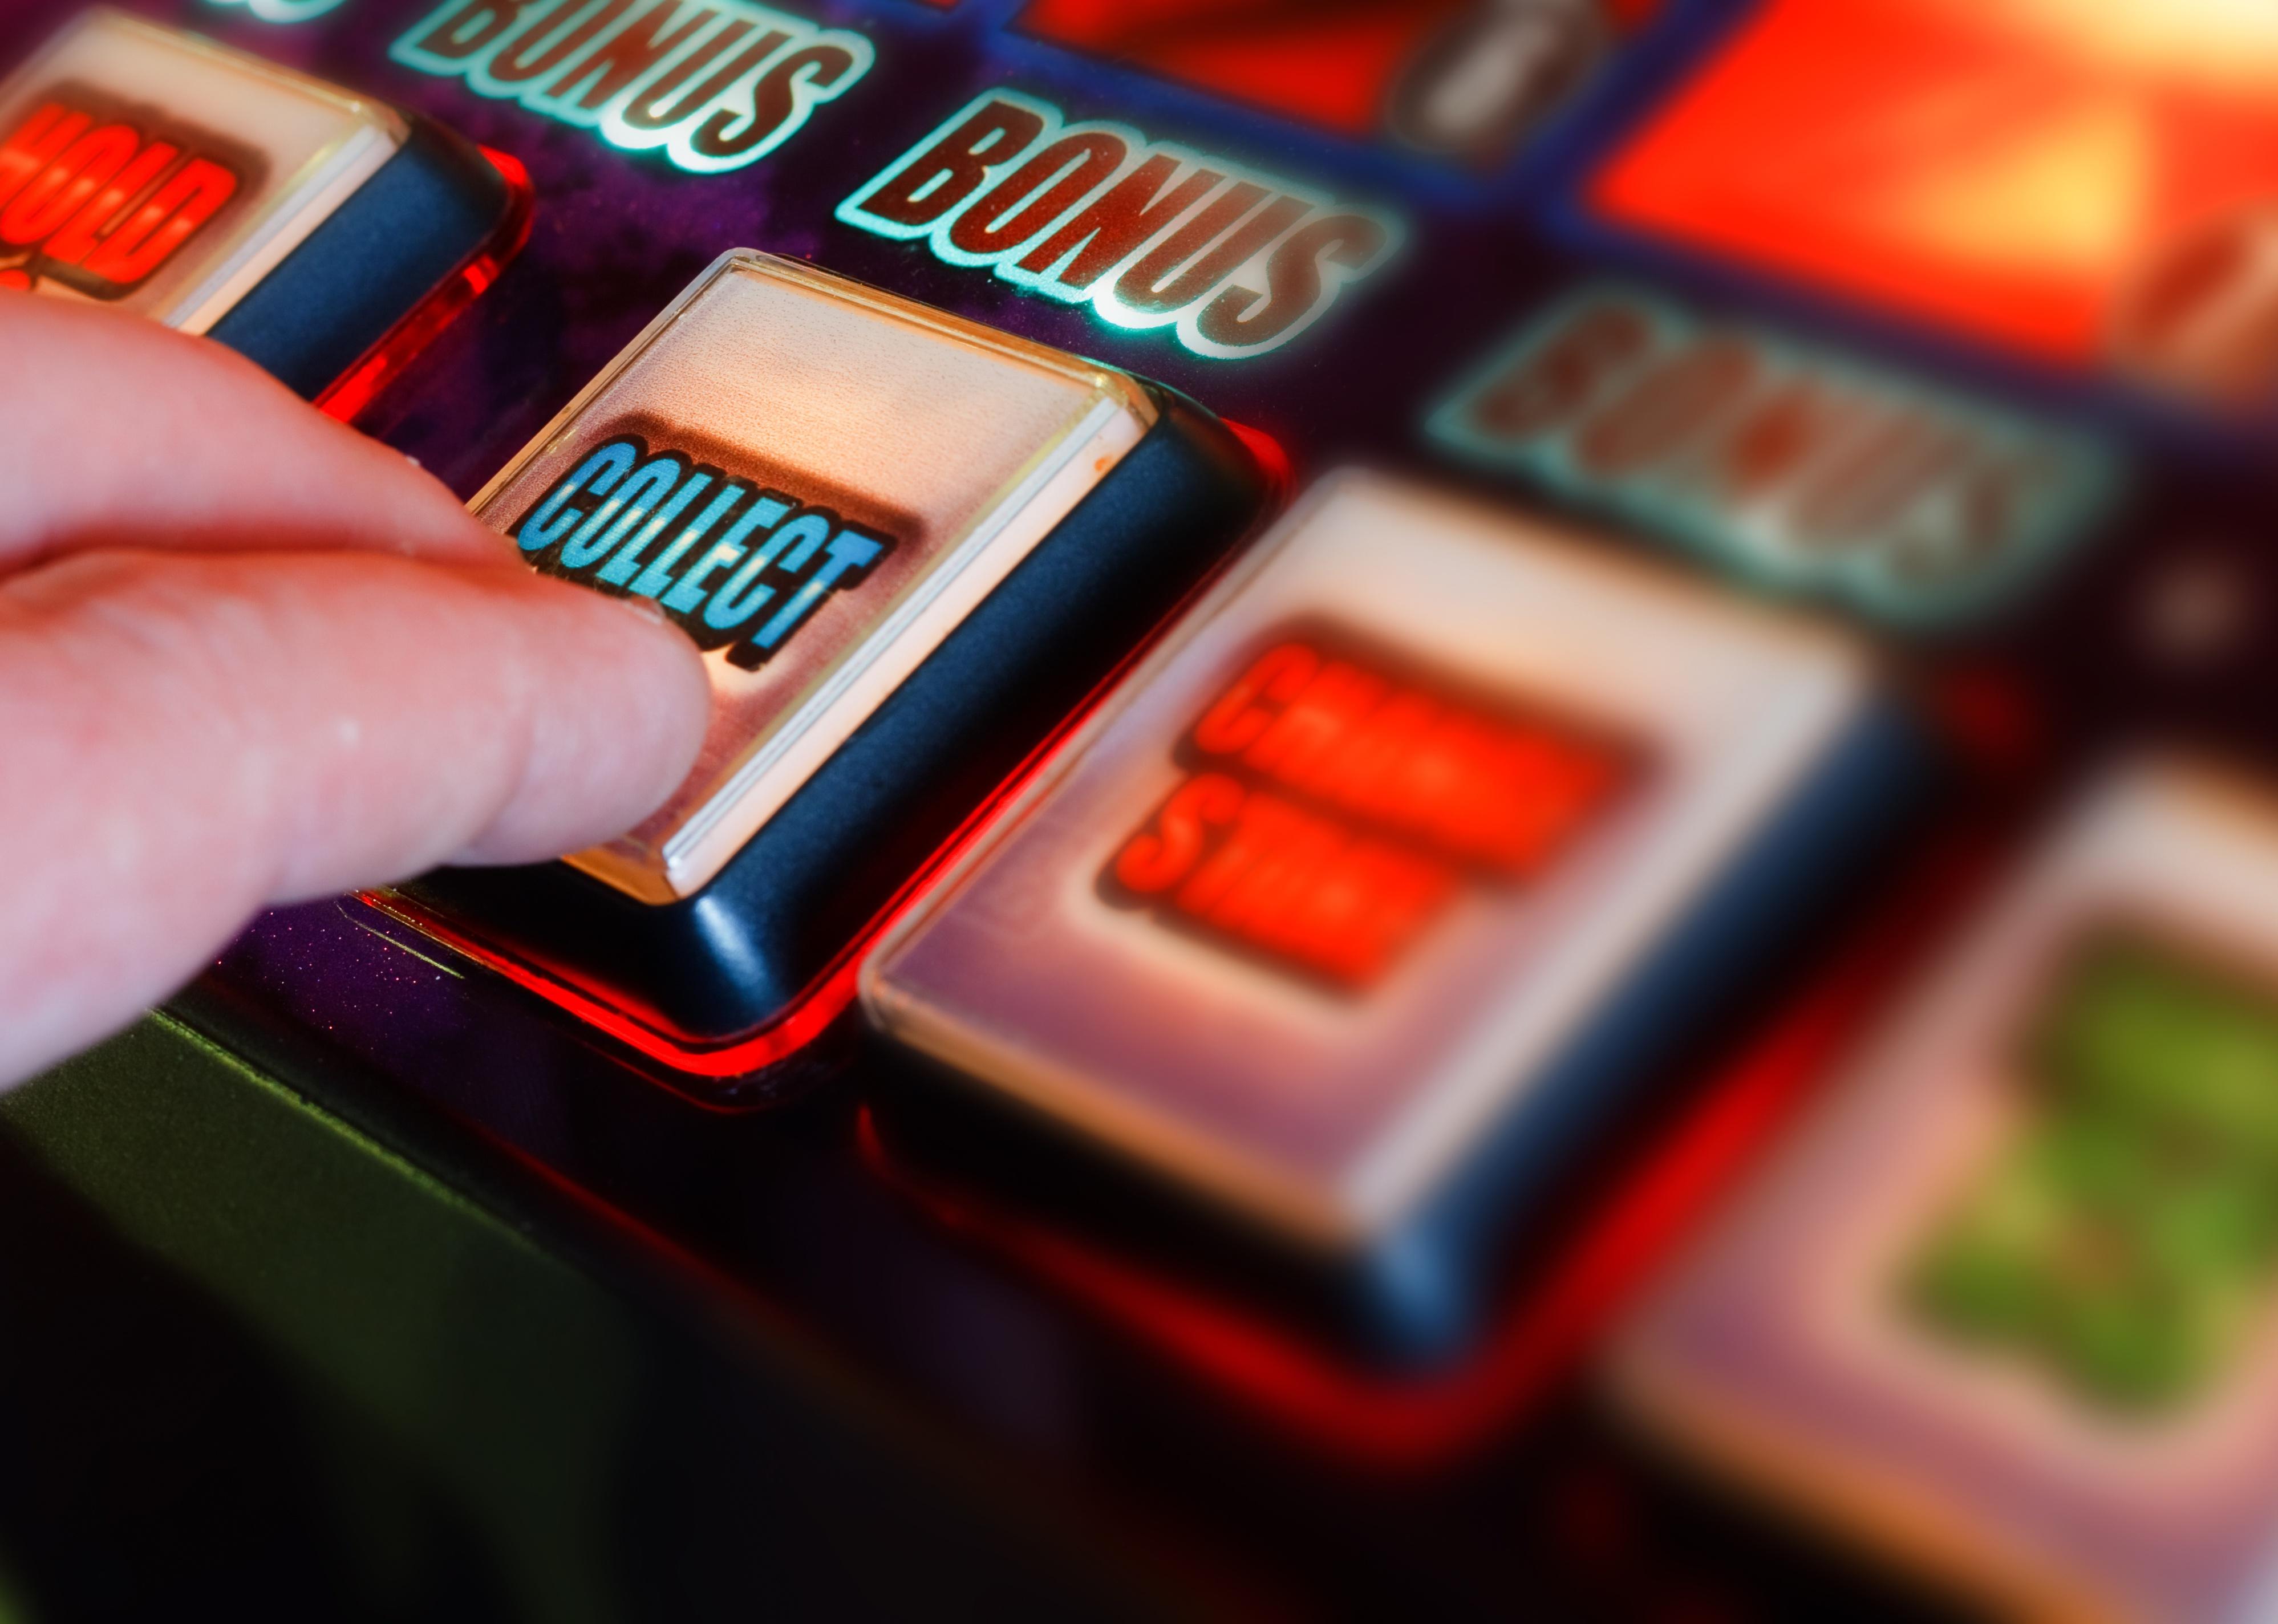 Fingers clicking "Collect" button on slot machine.